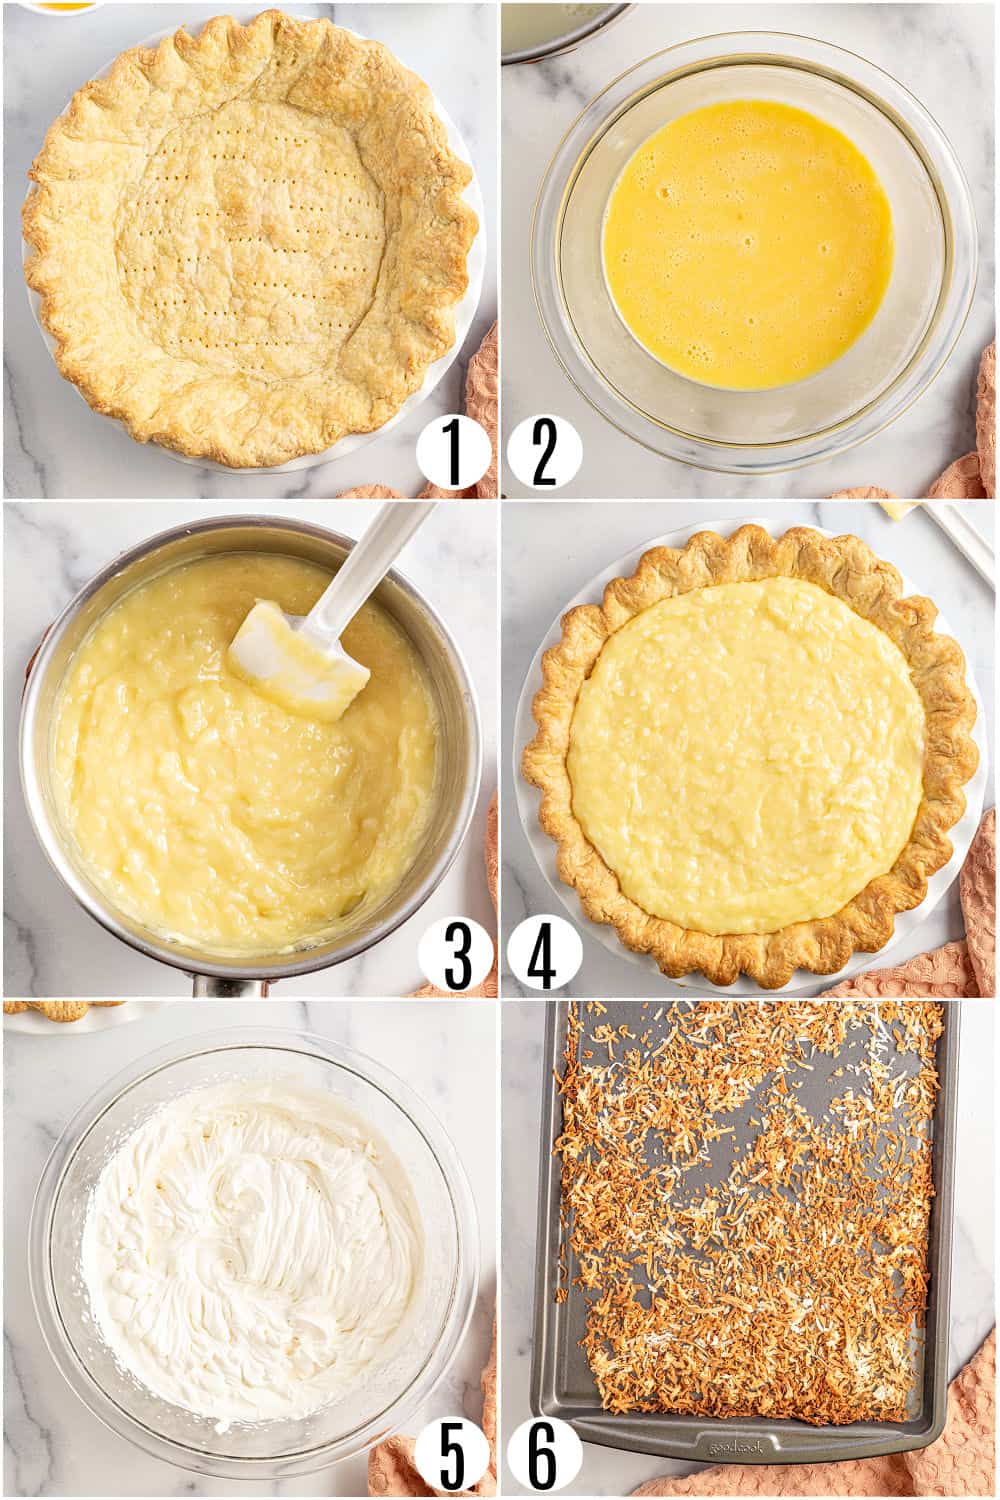 Step by step photos showing how to make coconut cream pie.